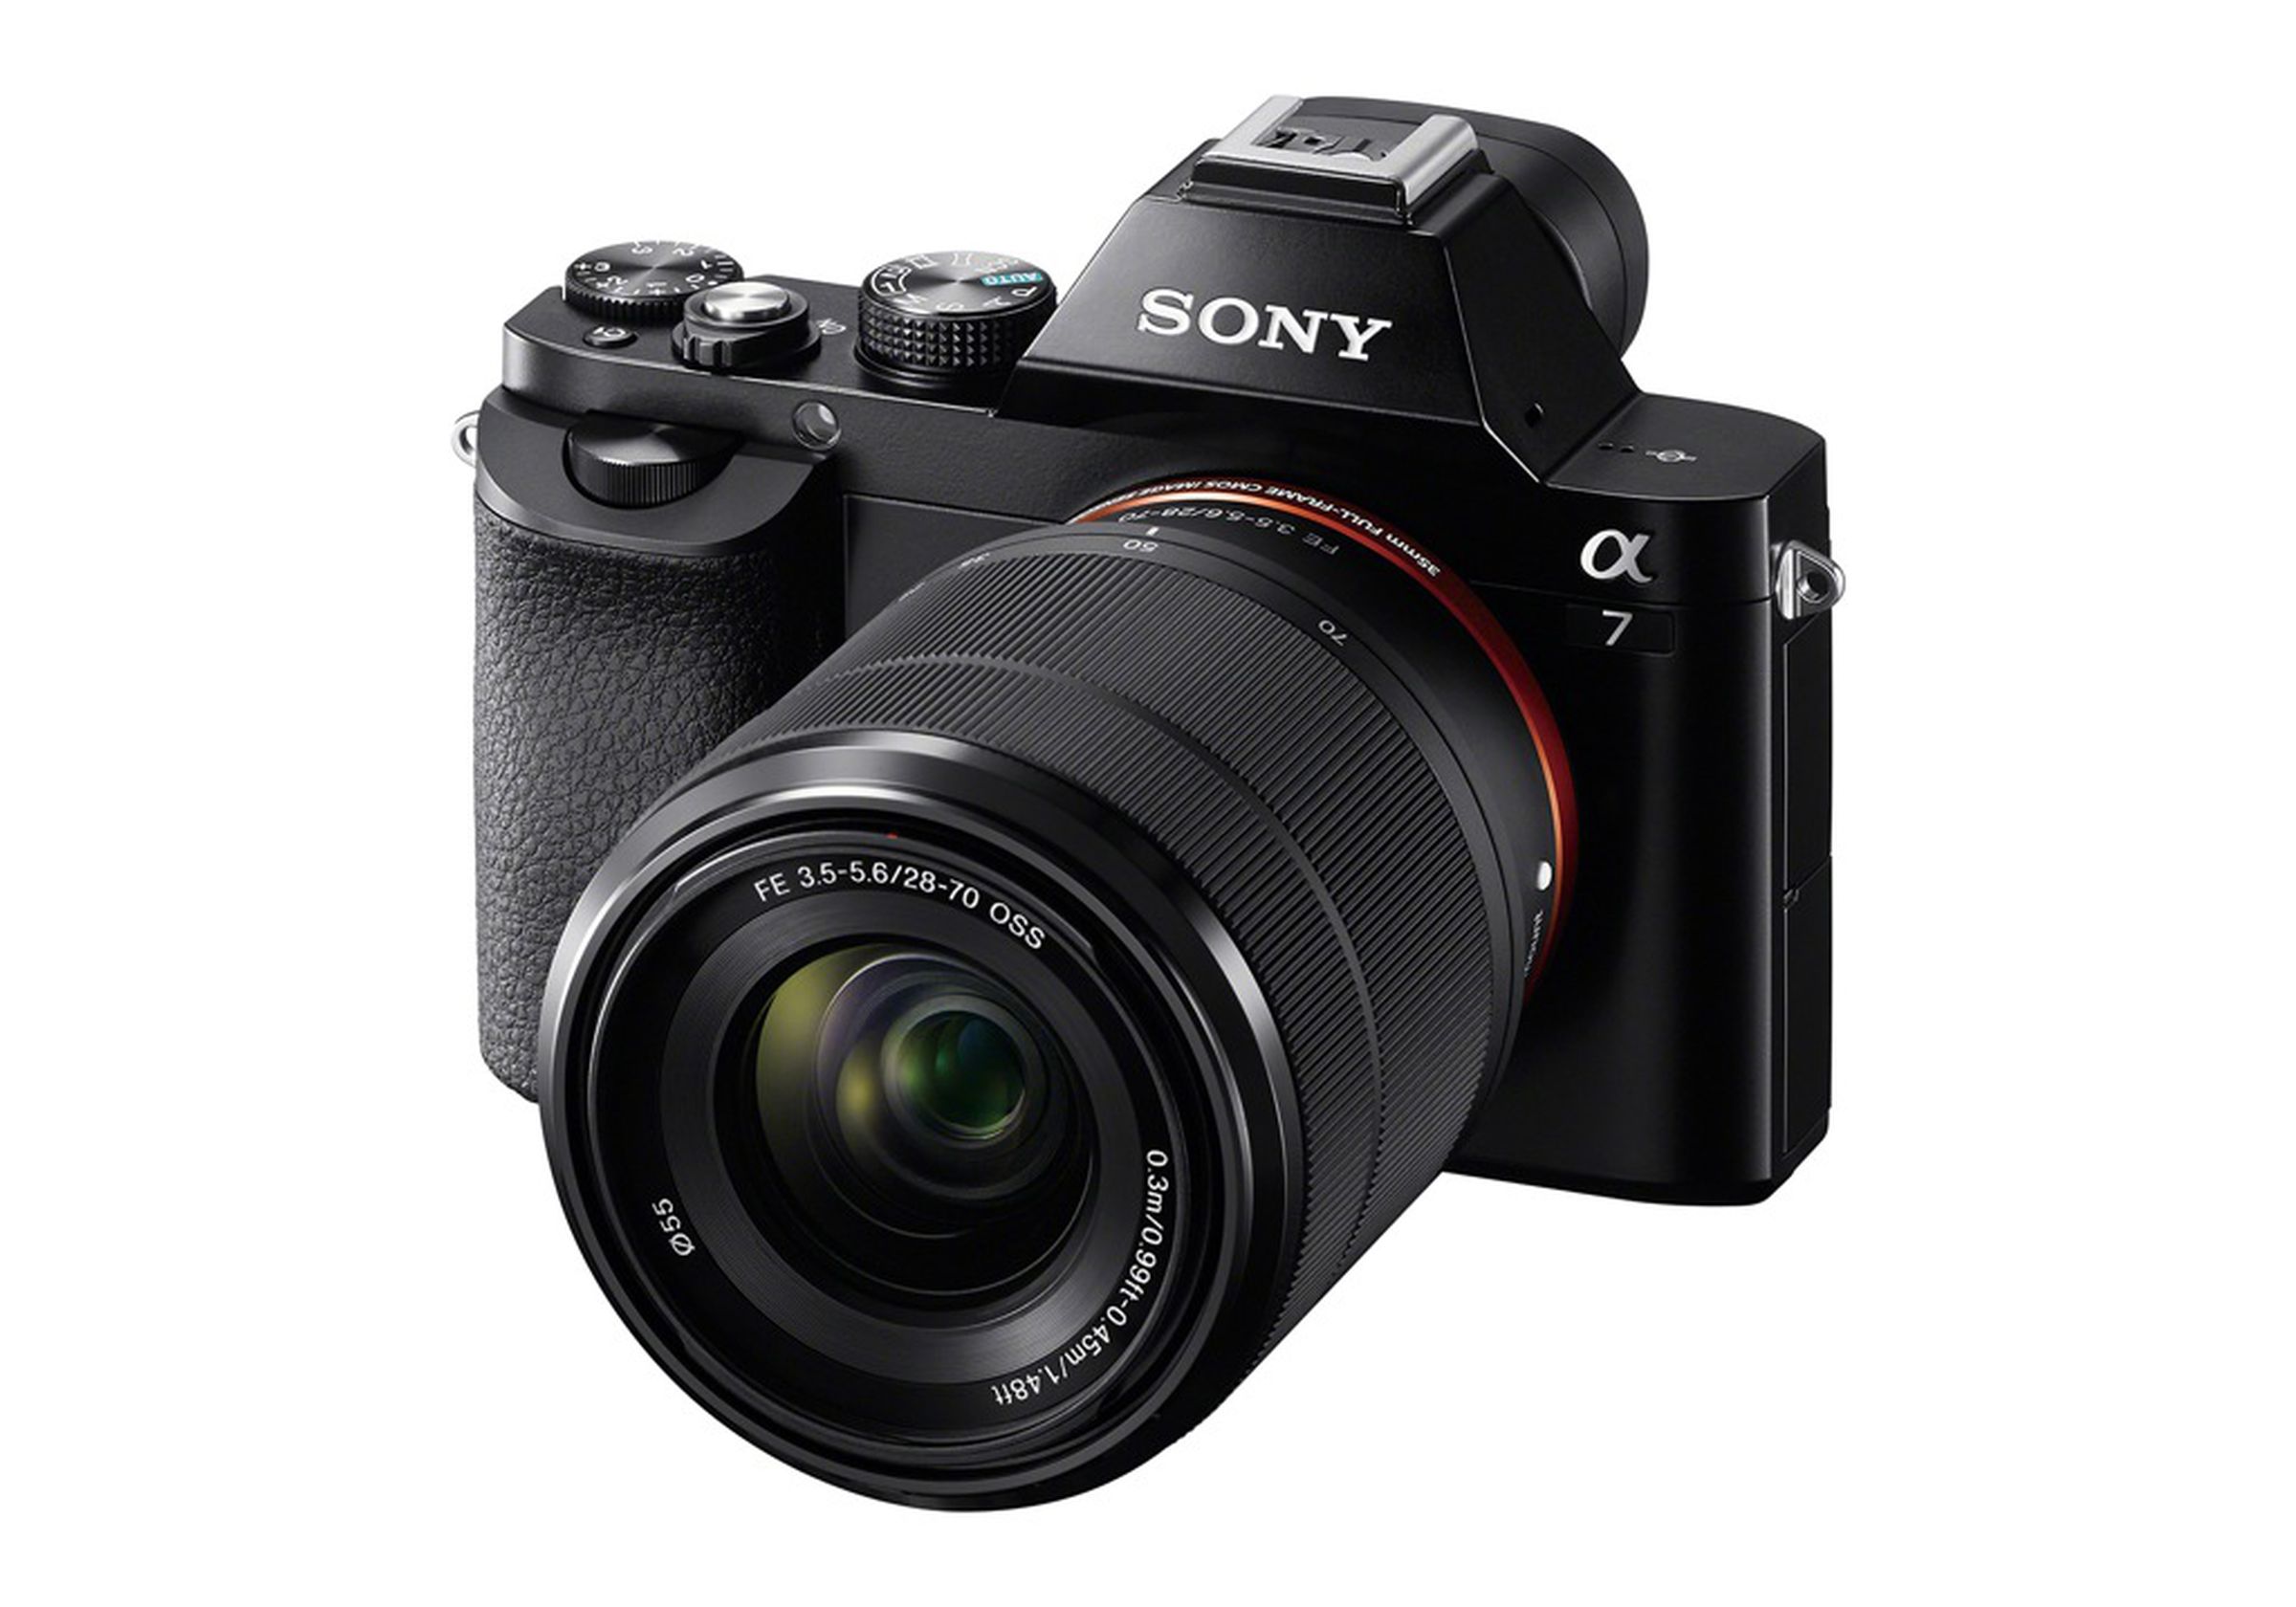 Sony Alpha 7 and 7R pictures